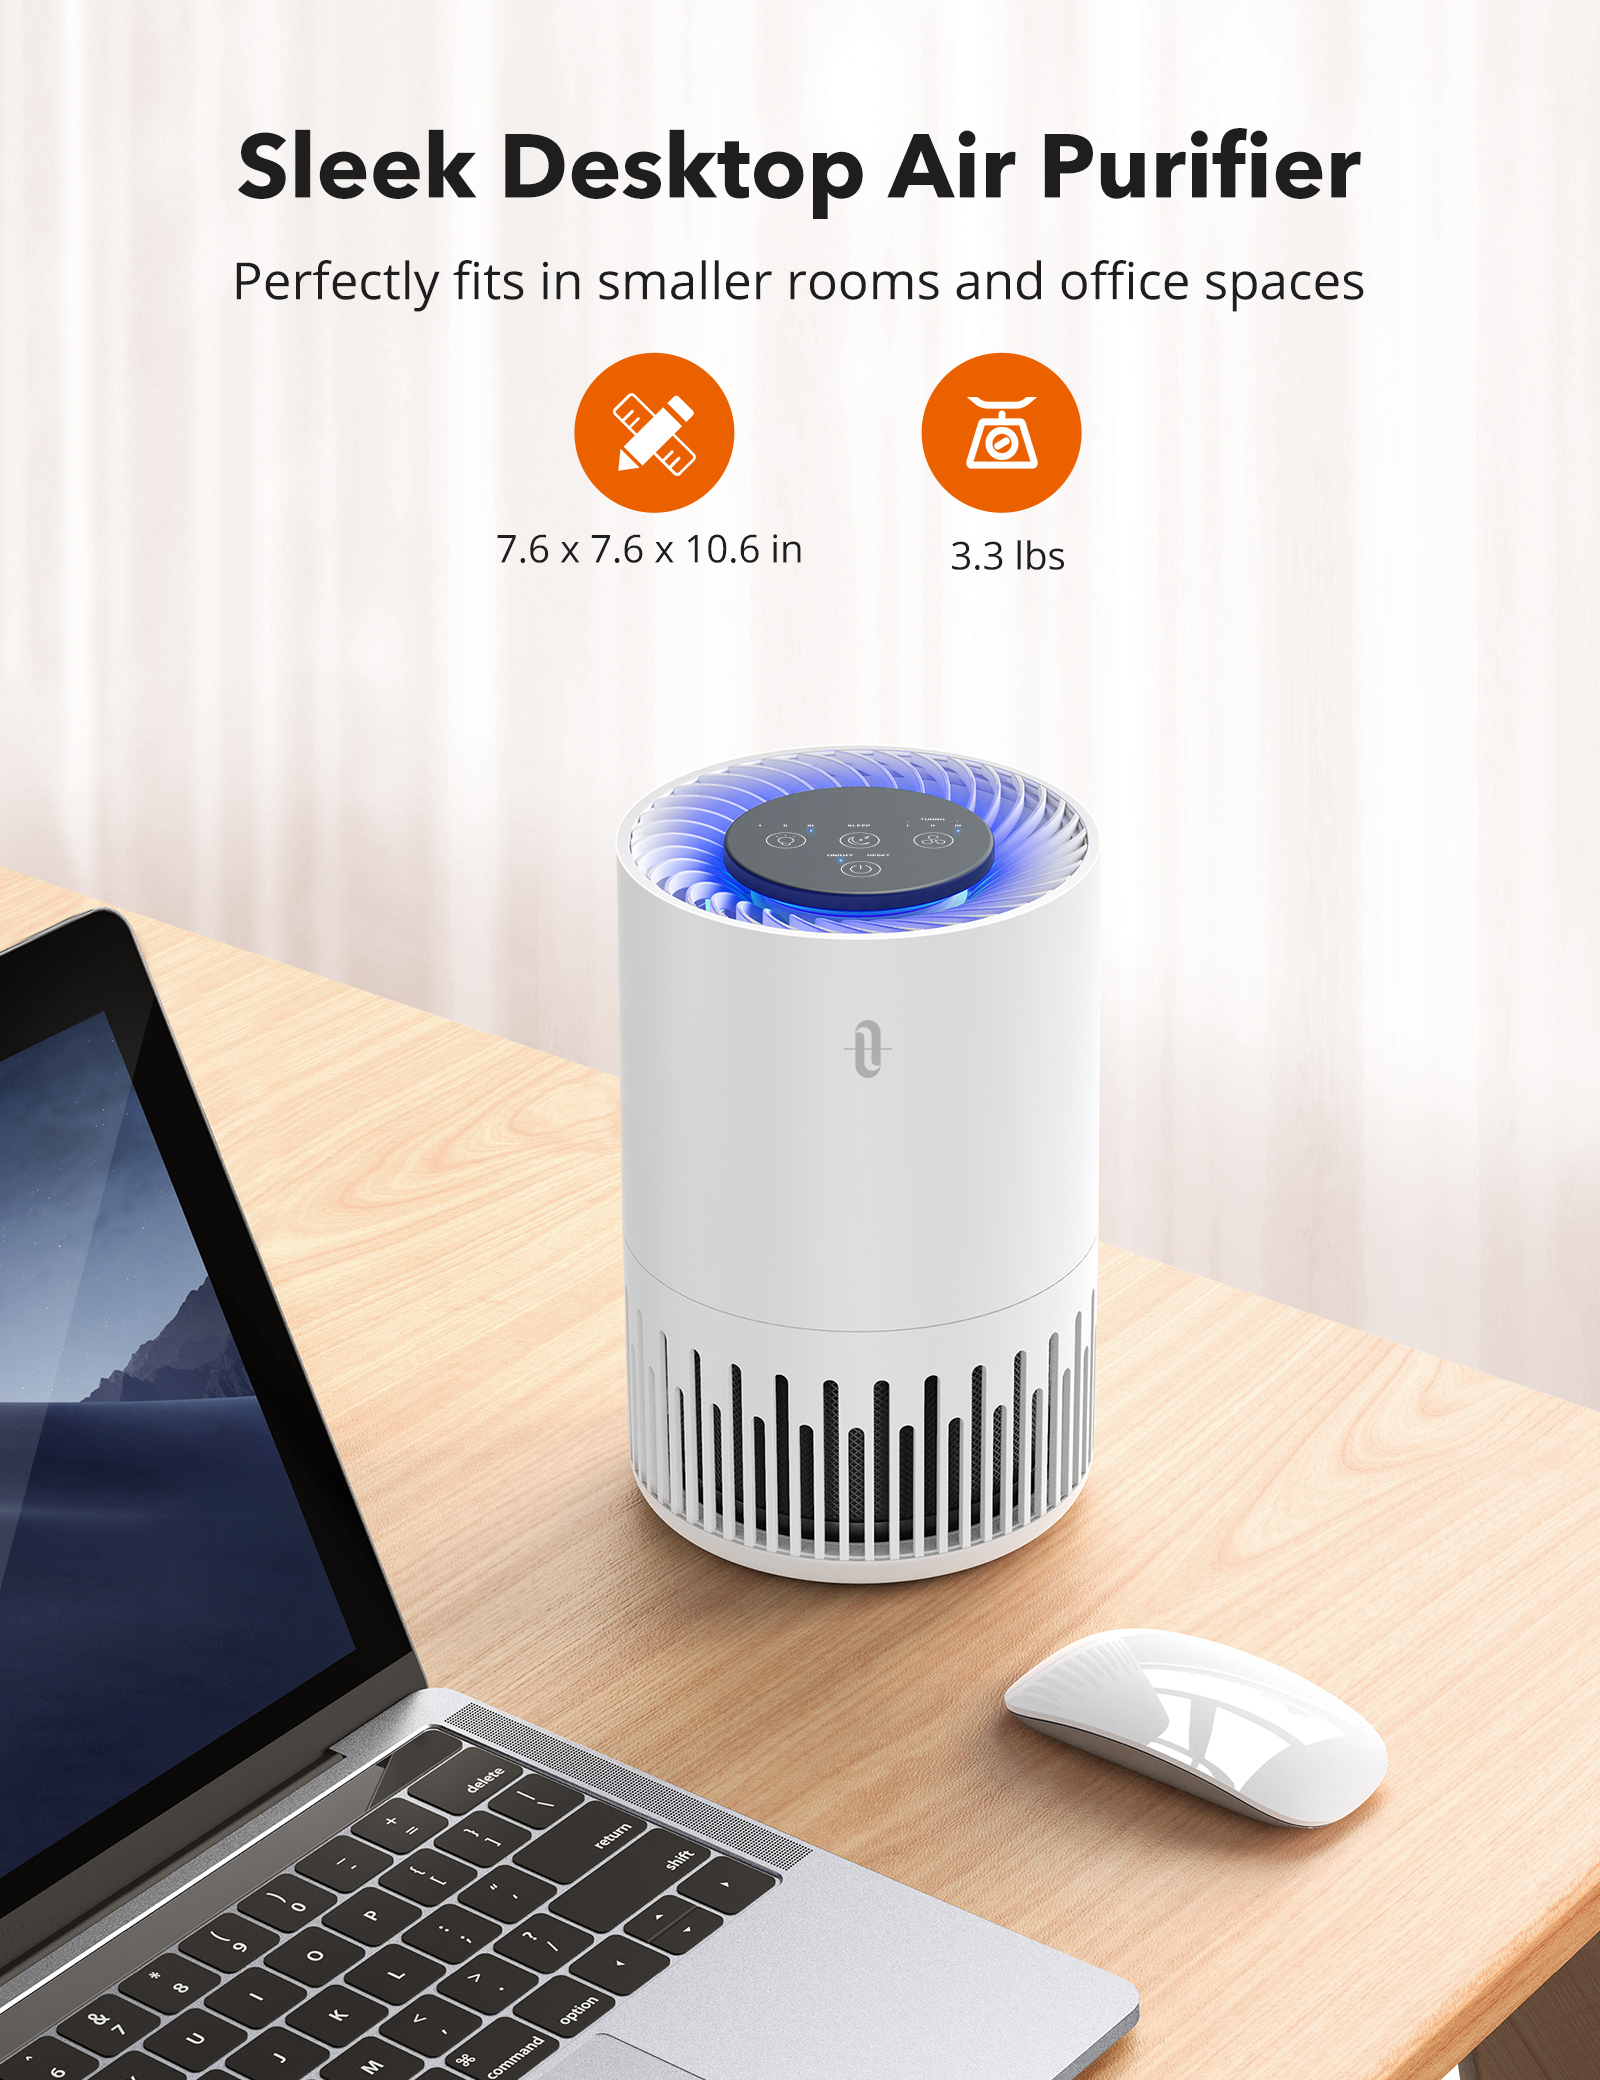 TaoTronics Air Purifier with True HEPA, Desktop Air Cleaner Perfect for Home, Bedroom, Smoke, Odor, and Dust TT-AP001 - image 5 of 8